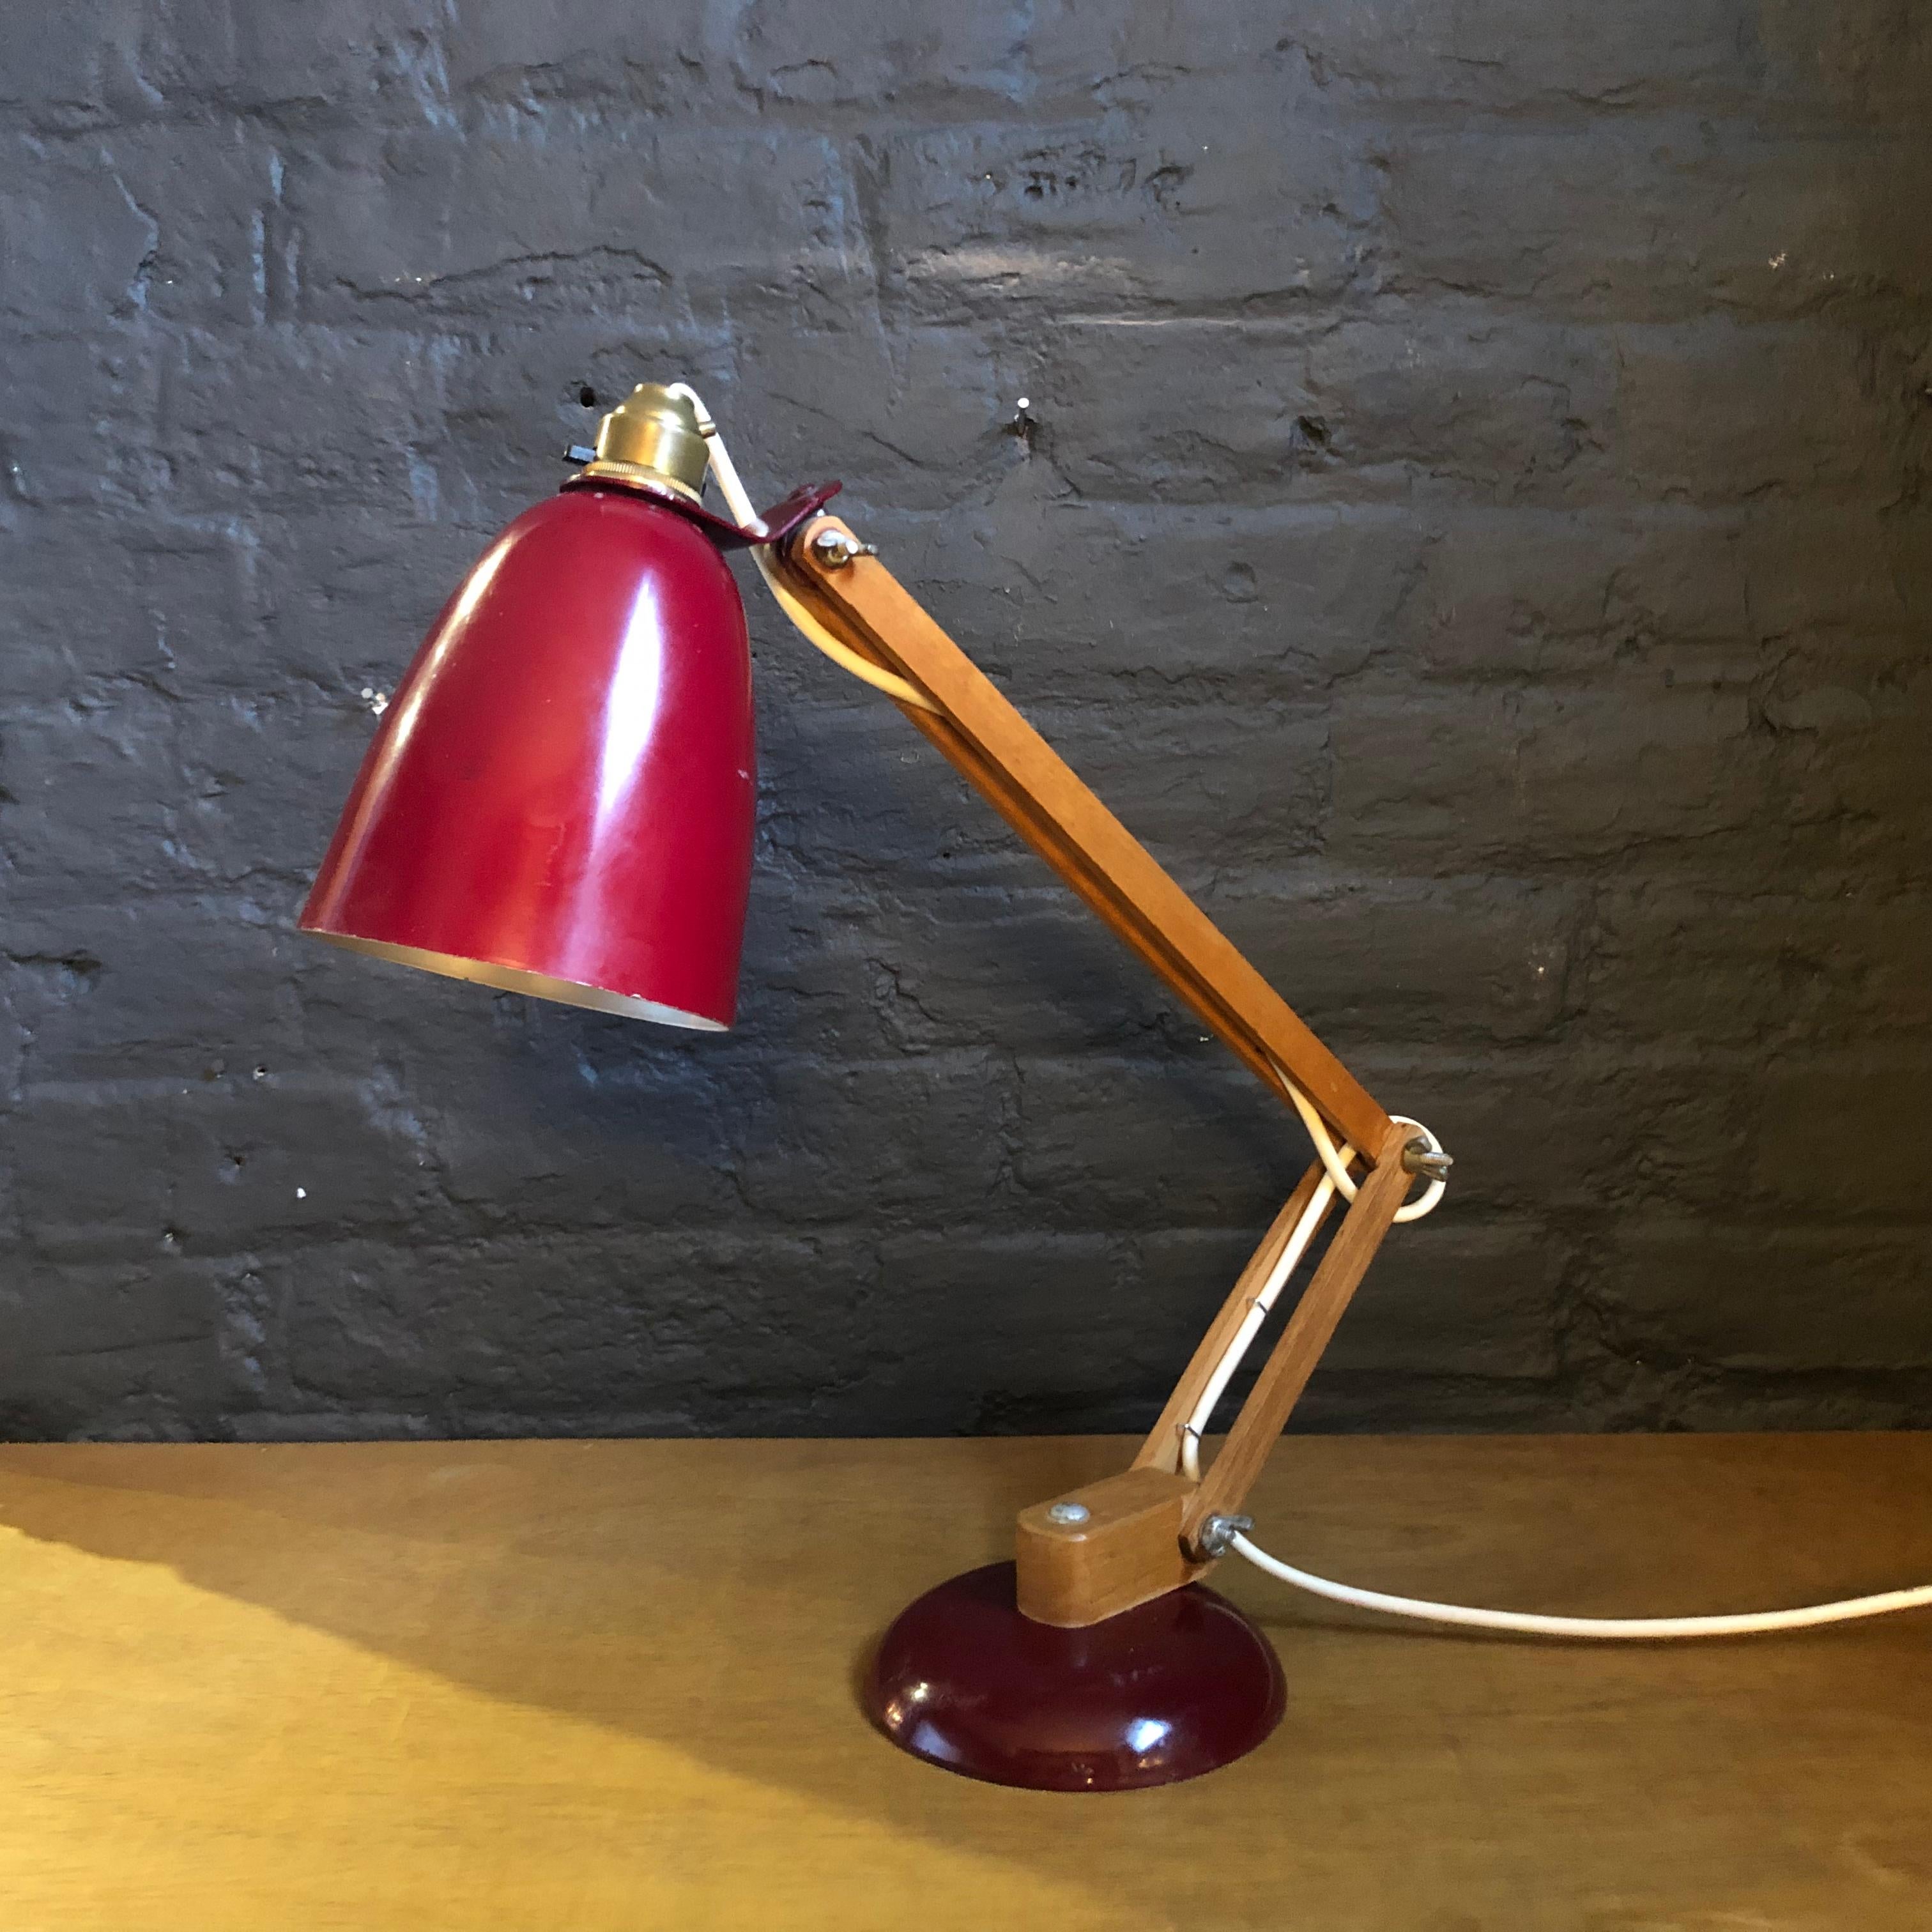 Vintage Maclamp desk or table lamp in burgundy with wooden arms. 

Designed by Terence Conran for Habitat in the 1950s, this lamp is an icon of the 1950s-1960s period.

In very good vintage condition. Some minimal signs of age, but nothing which